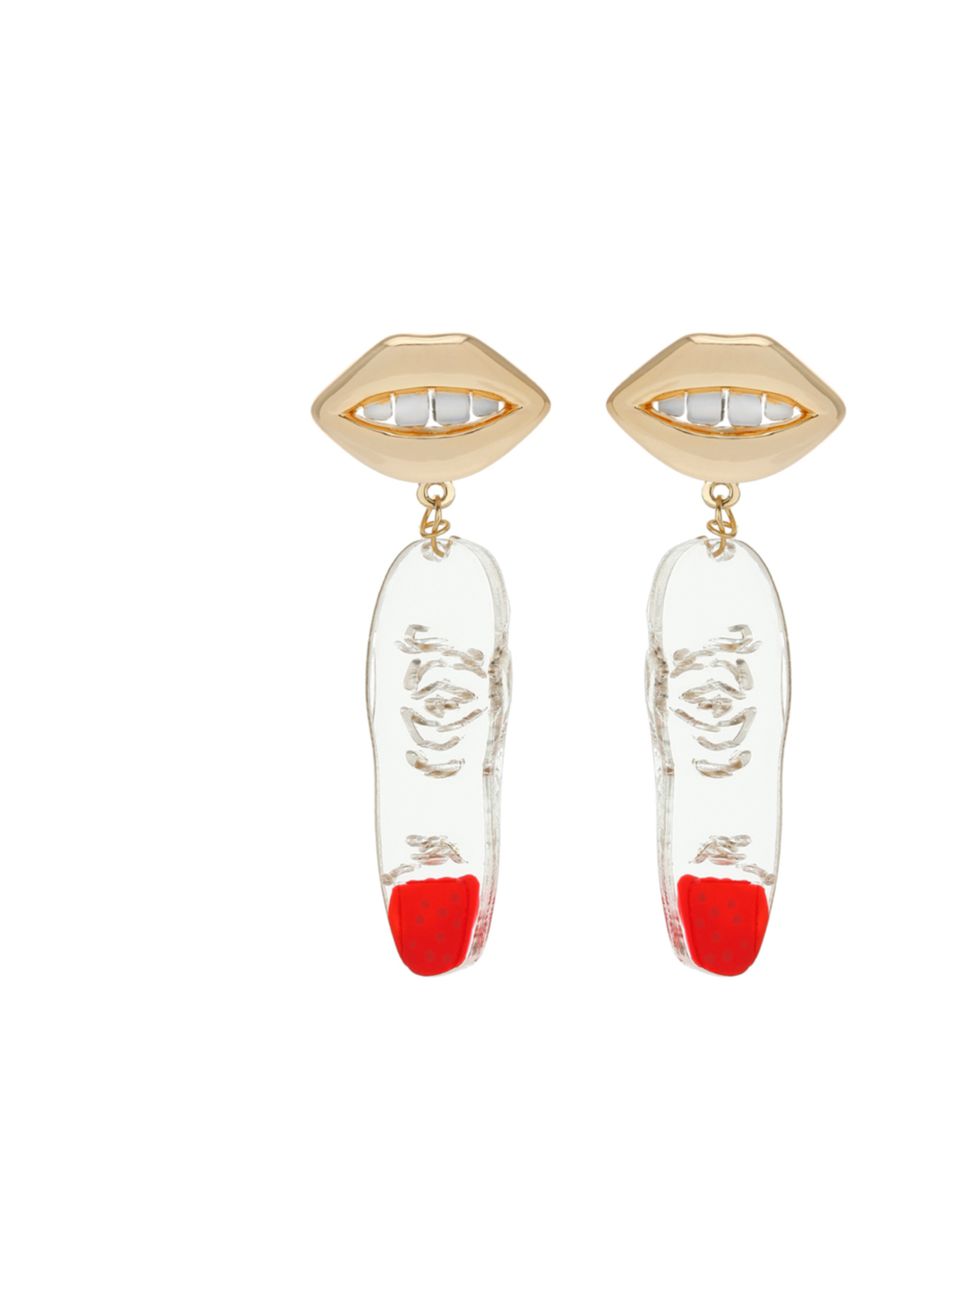 <p>Love statement jewellery? Then head to Topshop where the brilliantly bonkers new Patricia Nicolas collection lands today Patricia Nicolas for Freedom at Topshop earrings, £30, at <a href="http://www.topshop.com/webapp/wcs/stores/servlet/CatalogNavigat